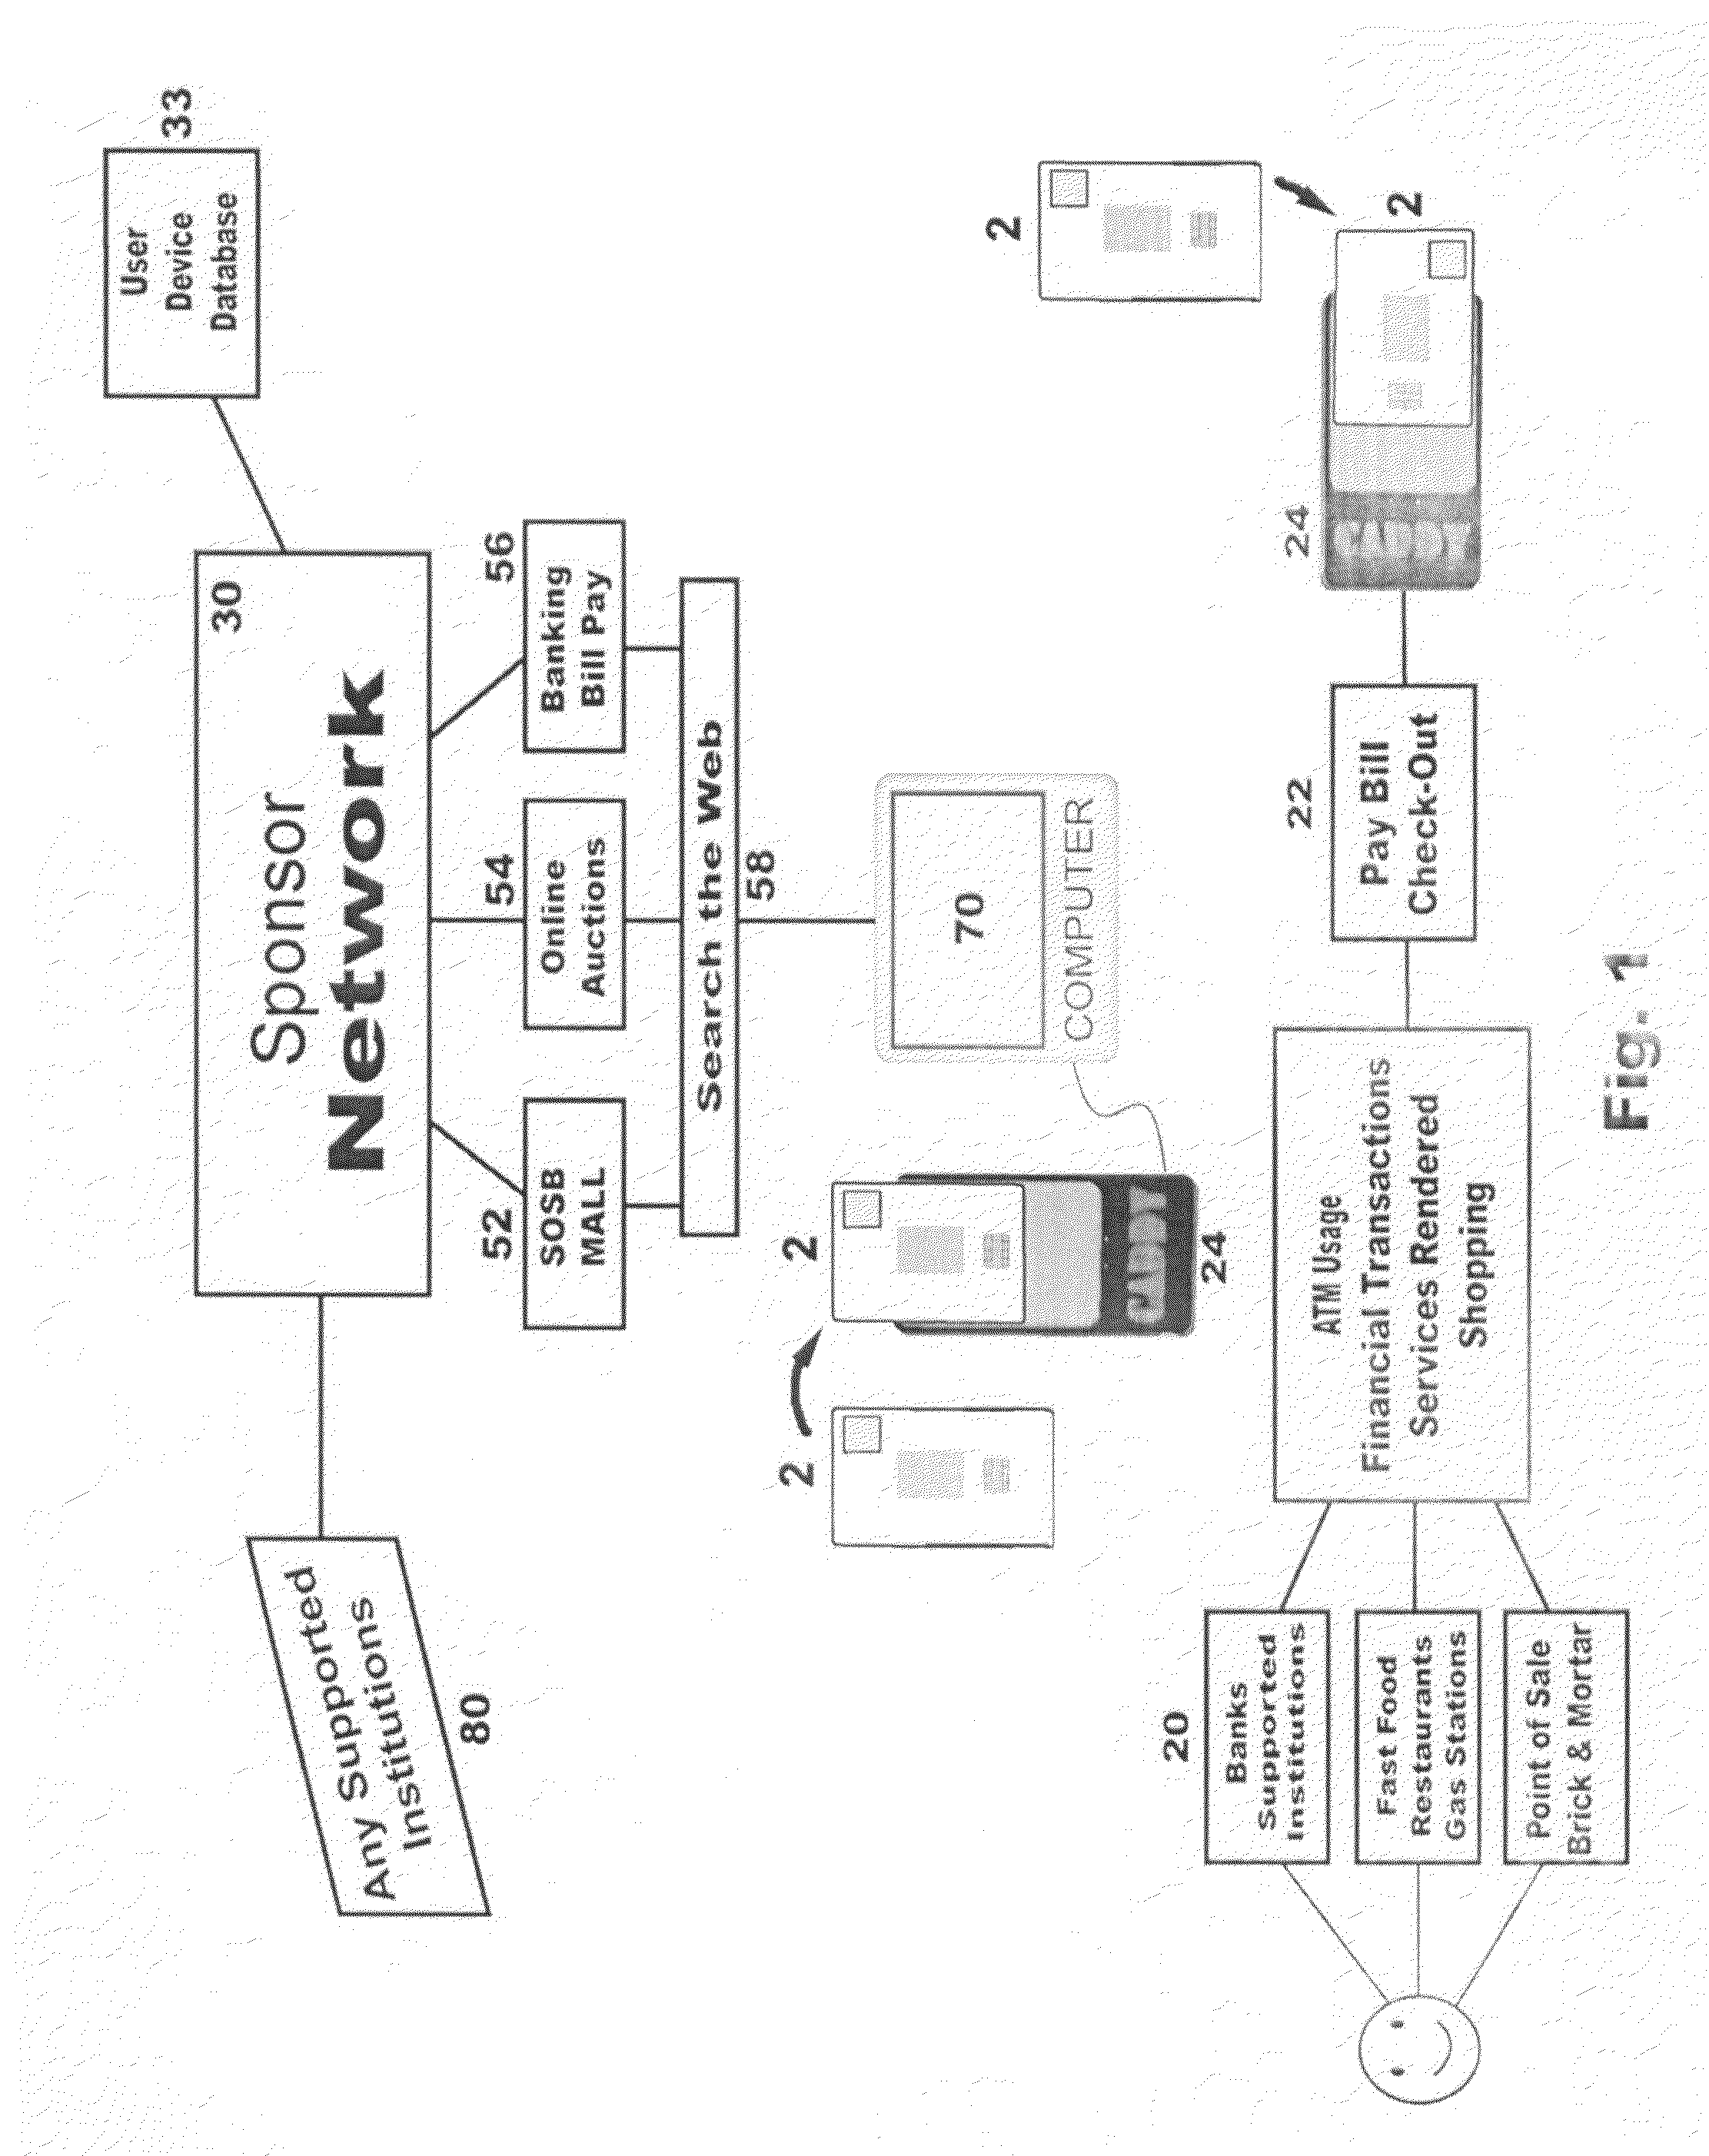 System for secure payment and authentication